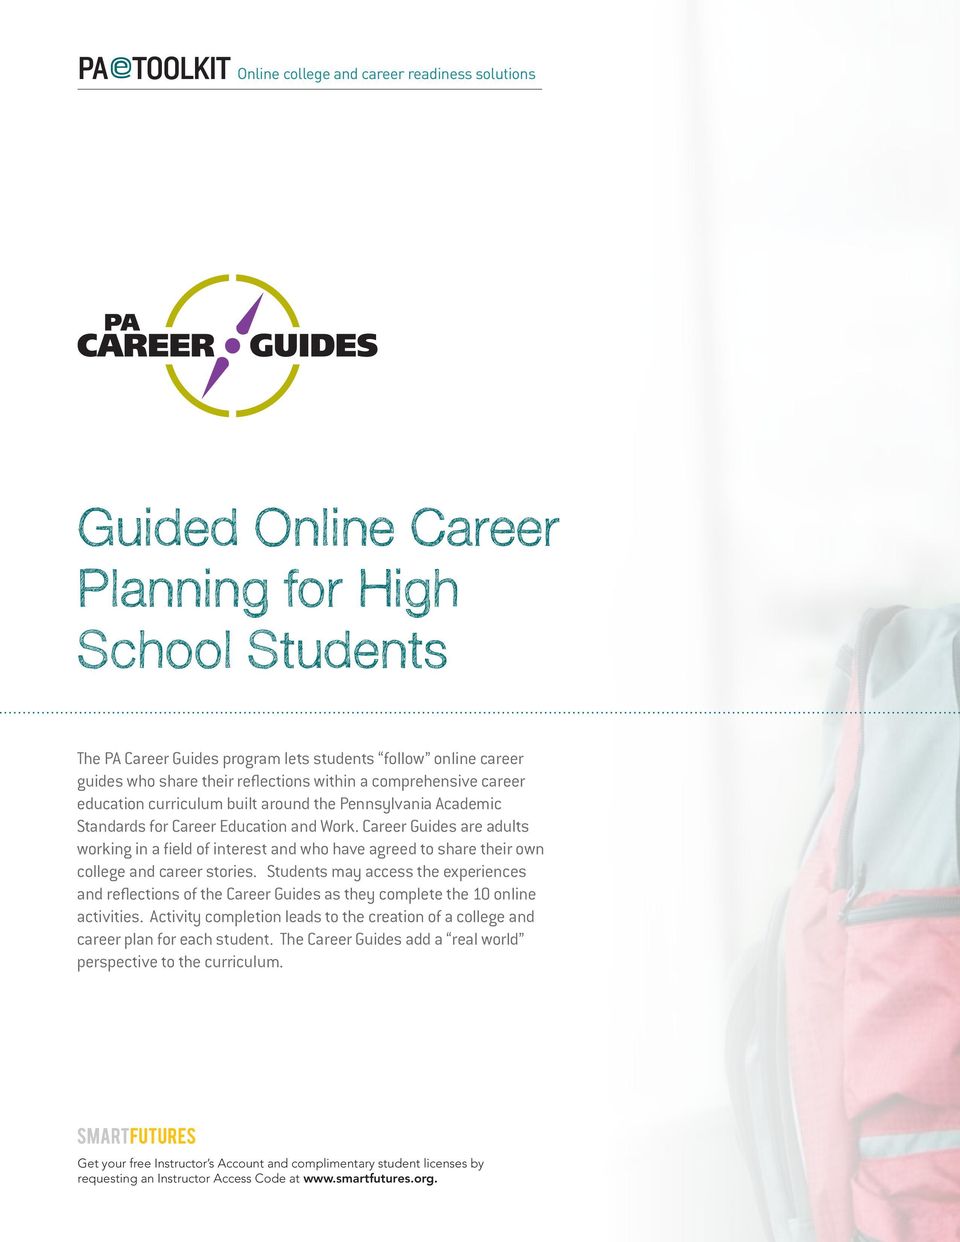 Career Guides are adults workin in a field of interest and who have areed to share their own collee and career stories.